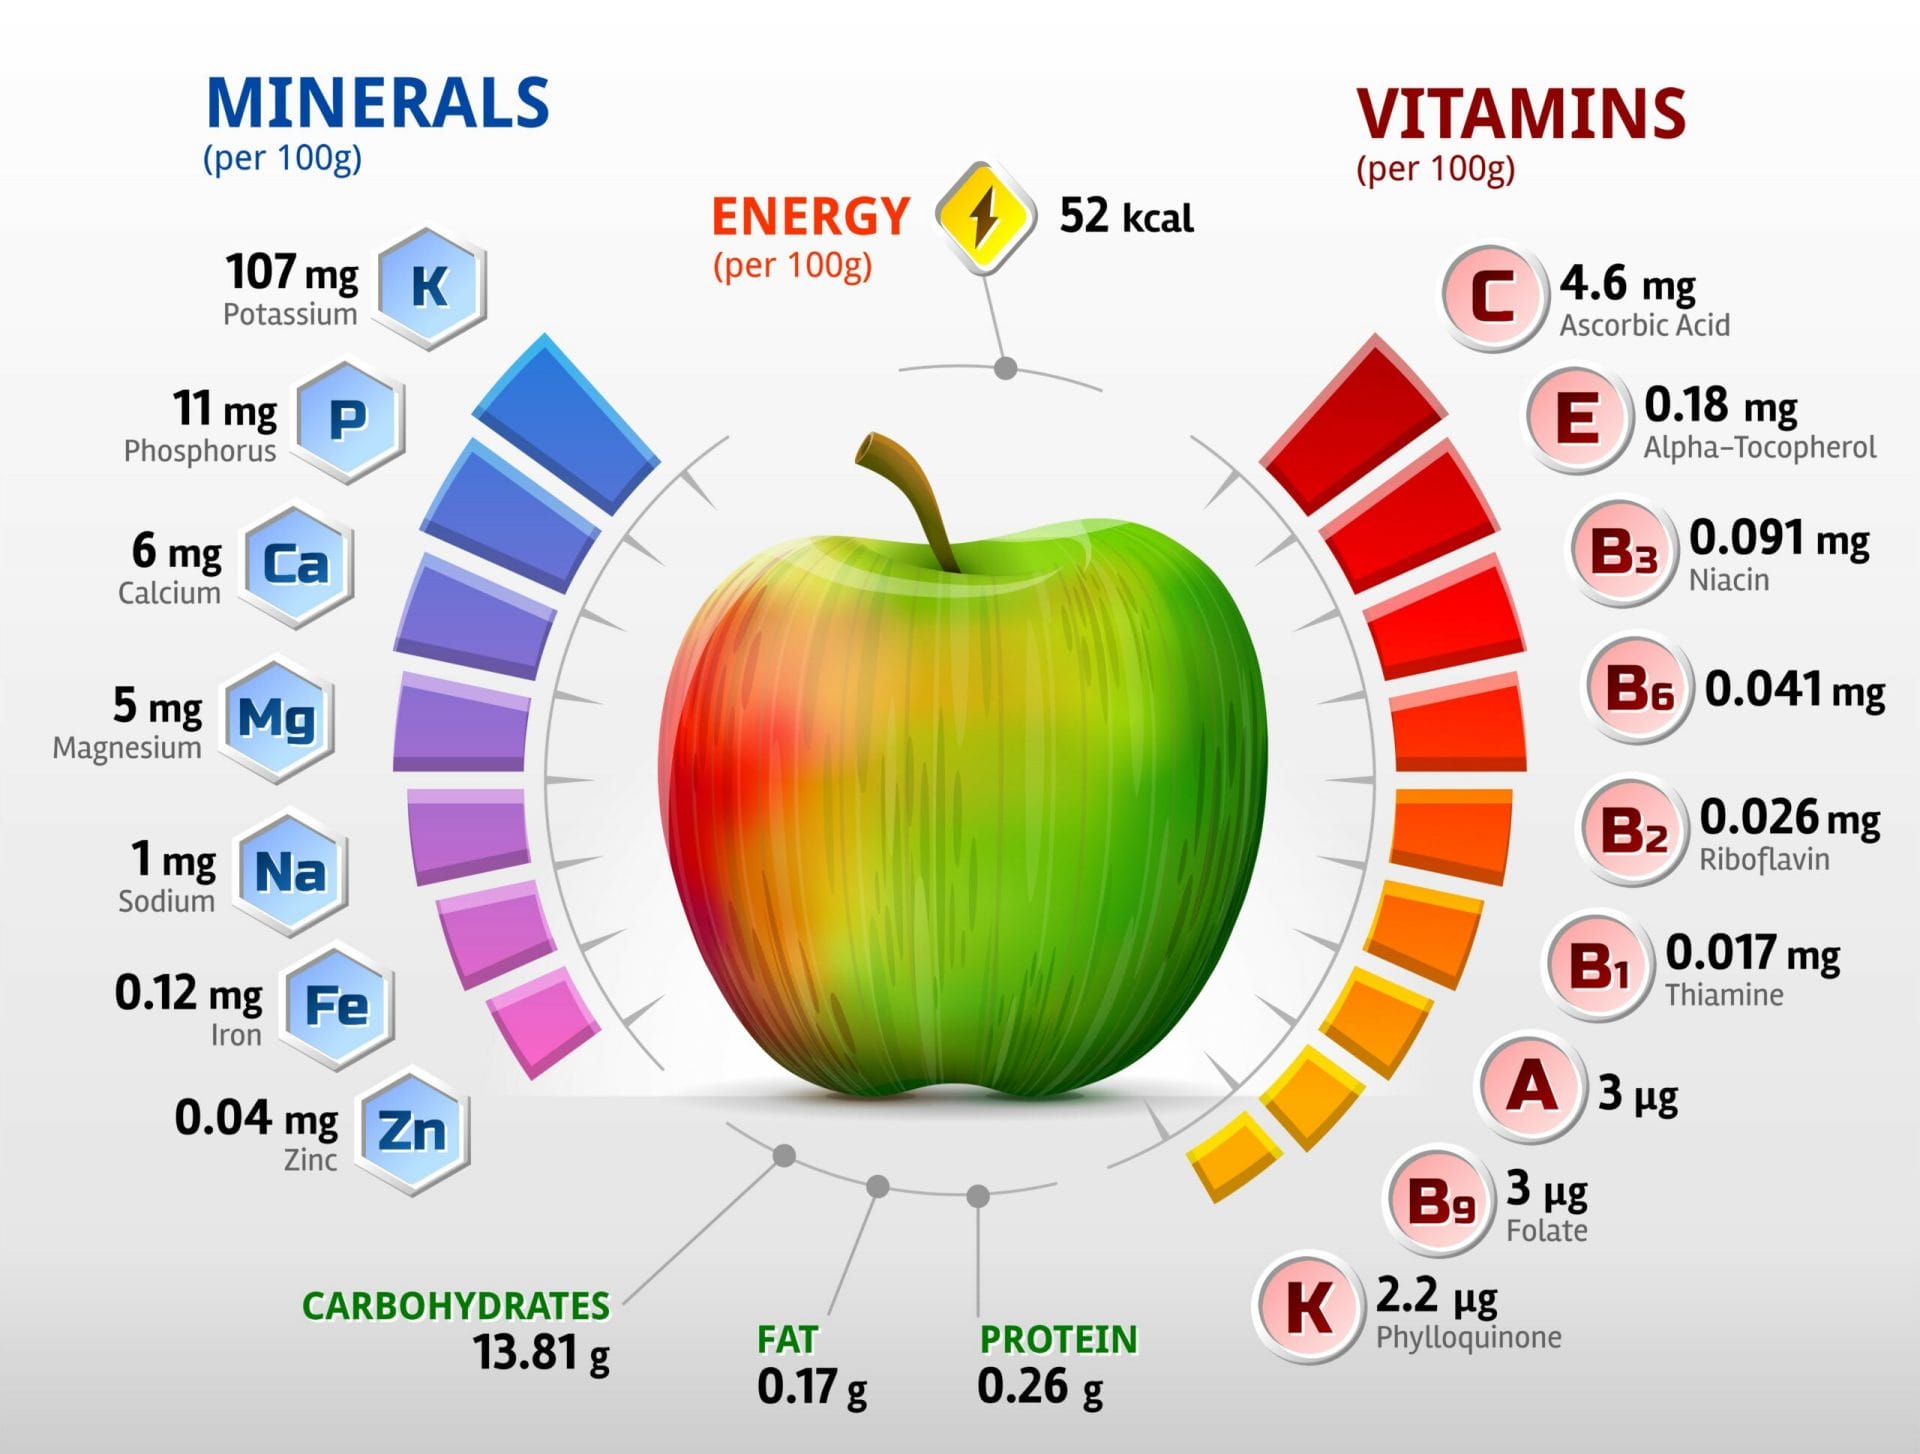 Are All Vitamins And Minerals Completely Necessary?